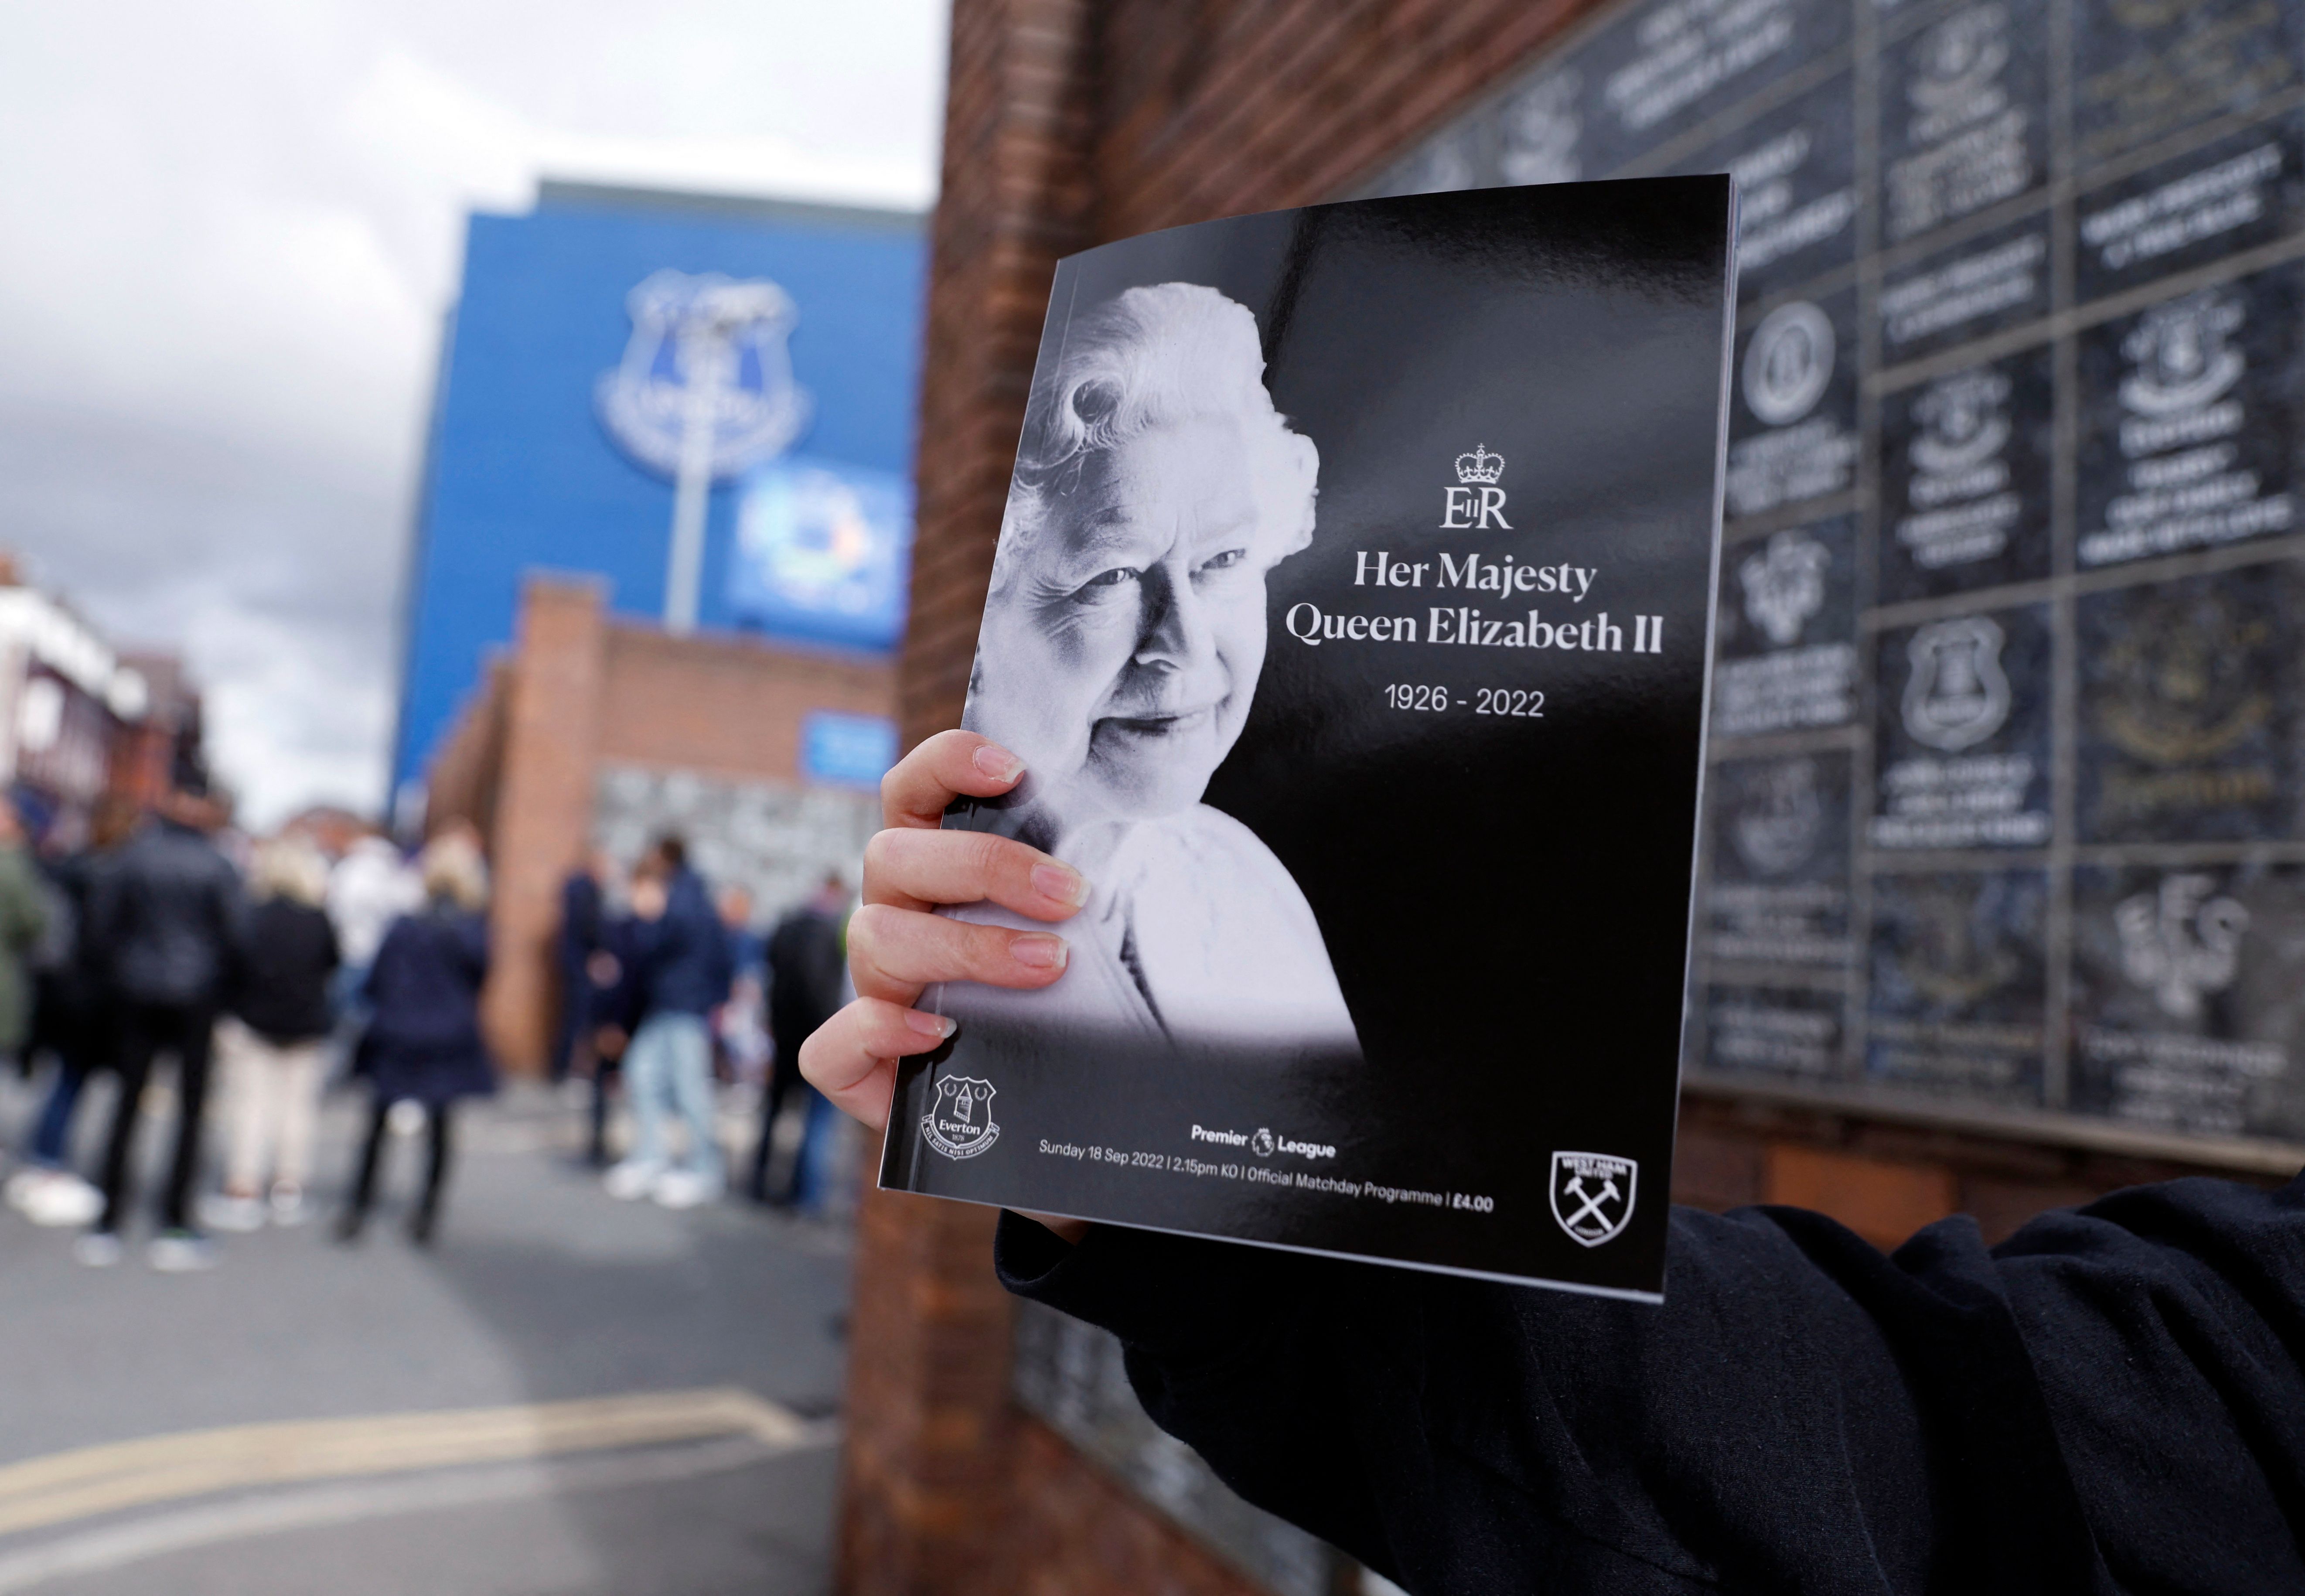 Soccer Football - Premier League - Everton v West Ham United - Goodison Park, Liverpool, Britain - September 18, 2022 General view of a matchday programme for sale outside the stadium with Britain's Queen Elizabeth on the front cover, following the death of Britain's Queen Elizabeth Action Images via Reuters/Jason Cairnduff EDITORIAL USE ONLY. No use with unauthorized audio, video, data, fixture lists, club/league logos or 'live' services. Online in-match use limited to 75 images, no video emula